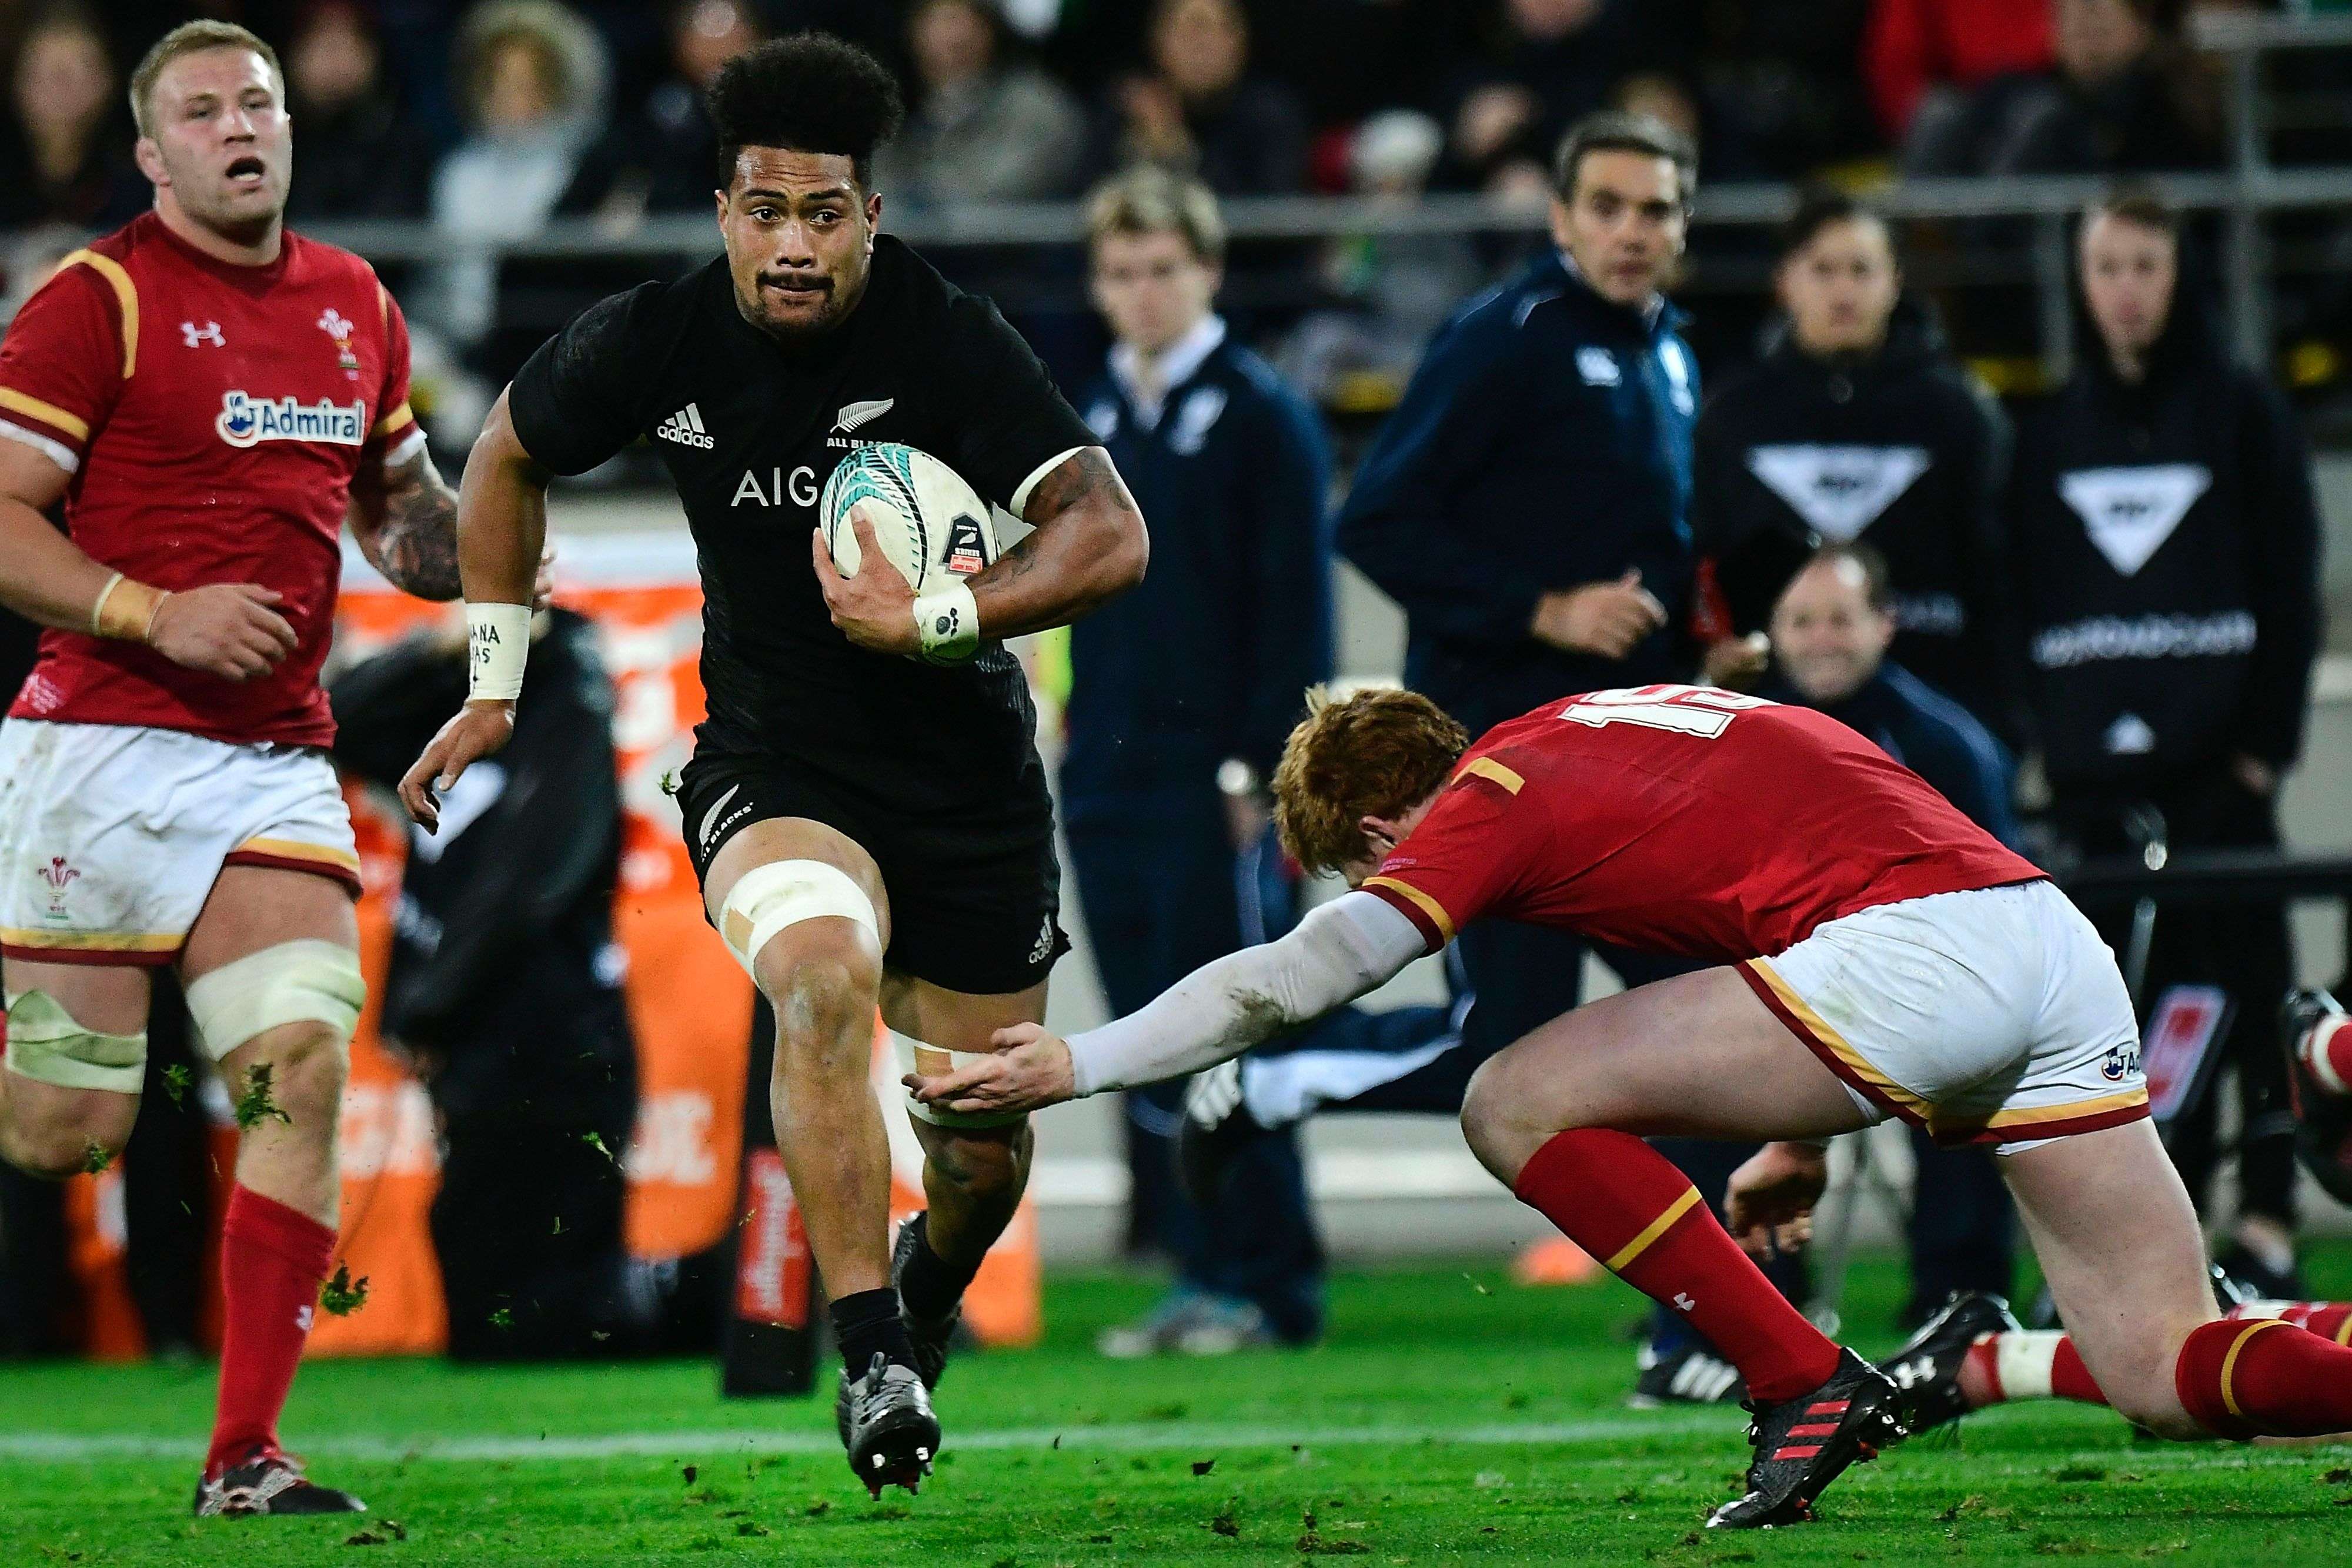 New Zealand's Ardie Savea runs through a tackle by Wales’ Matt Morgan during their test match in Wellington last month. Photo: AFP